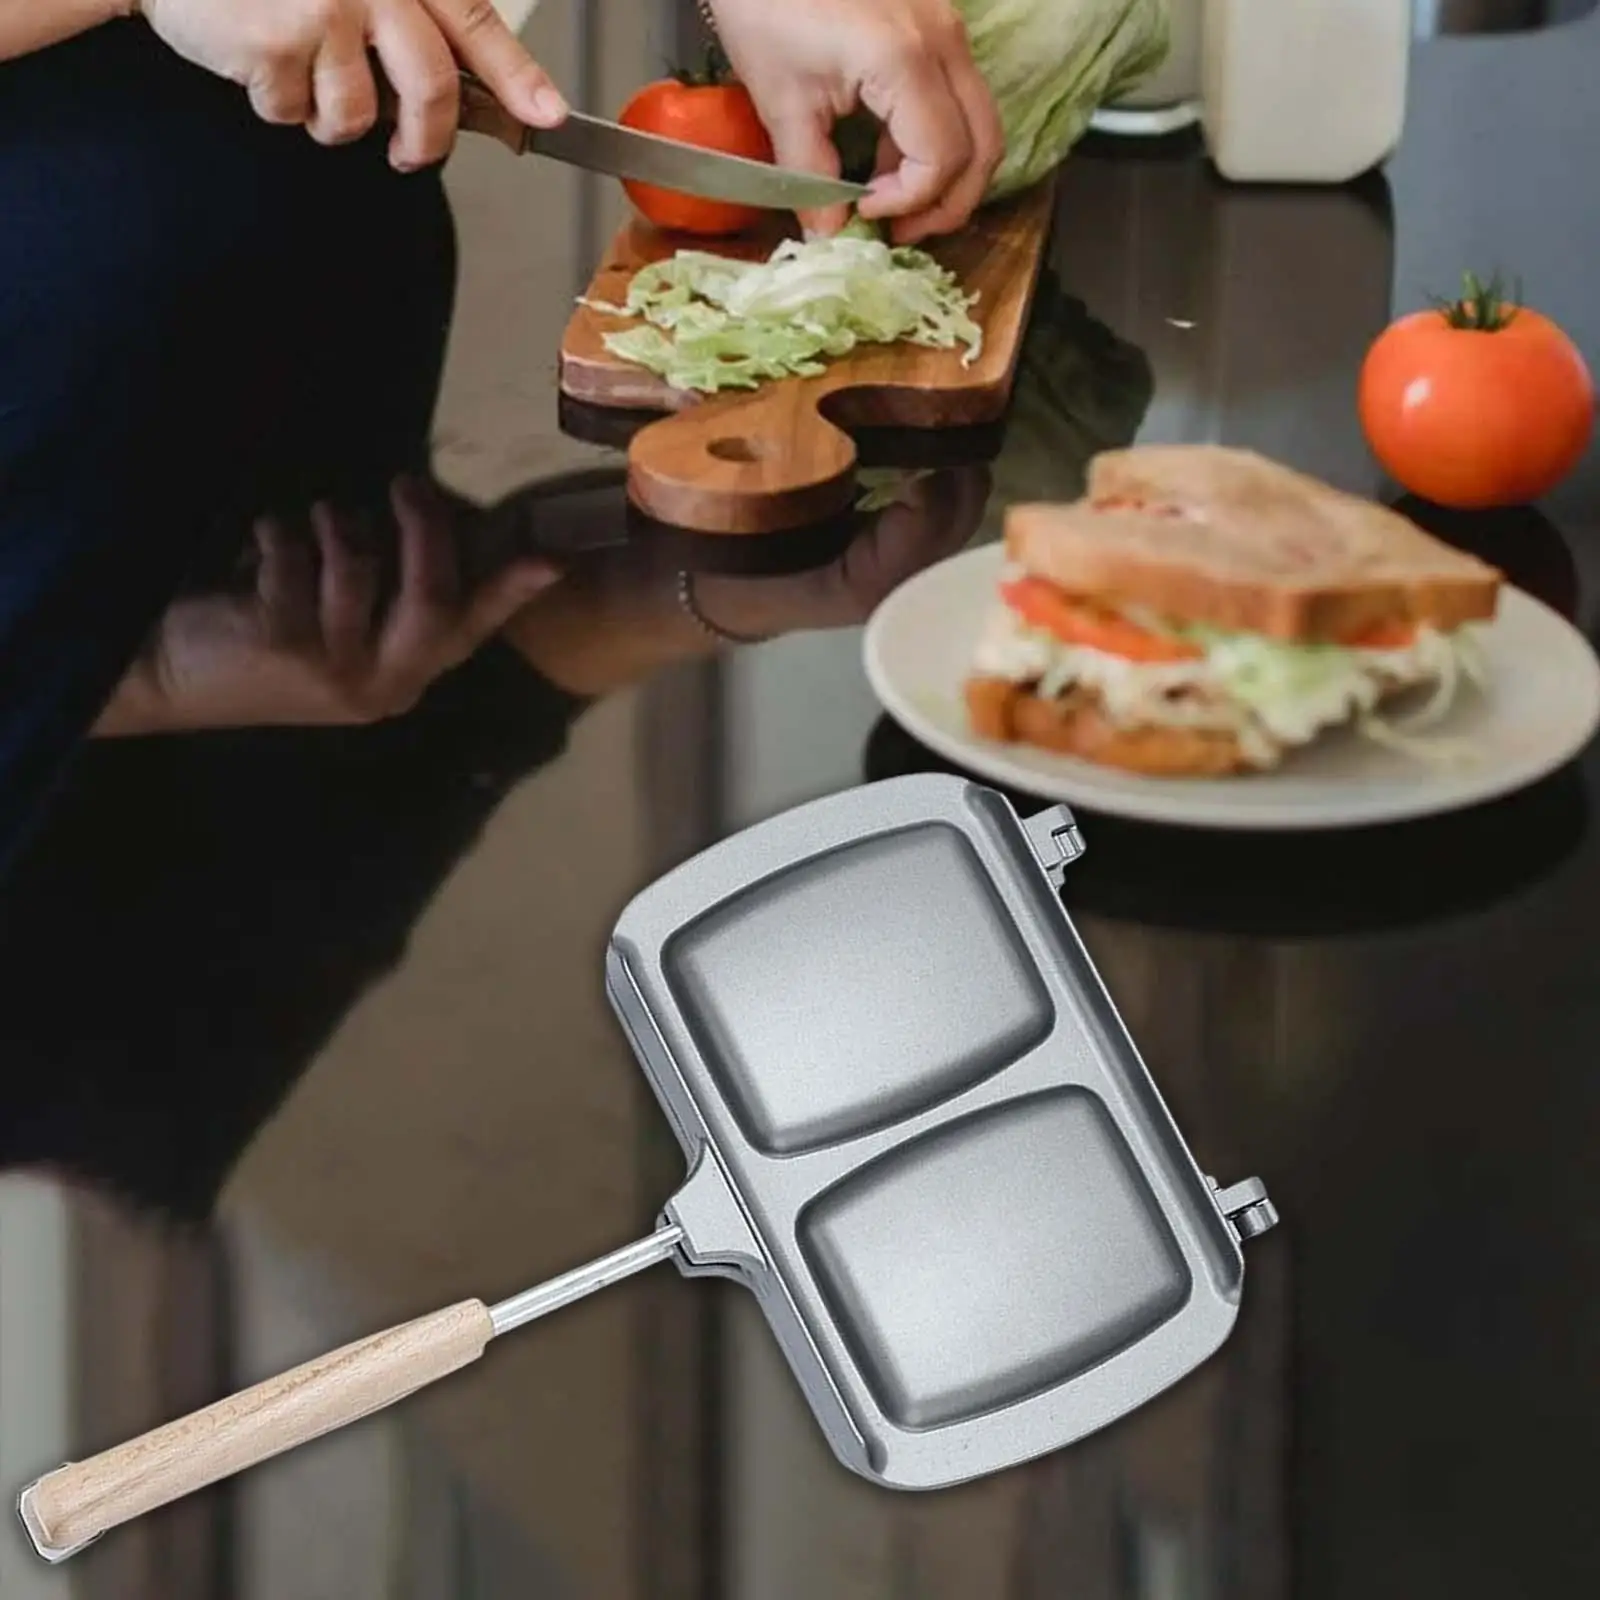 Bread Toast Maker Grill Pan with Wooden Handle Non Stick for Stove Top